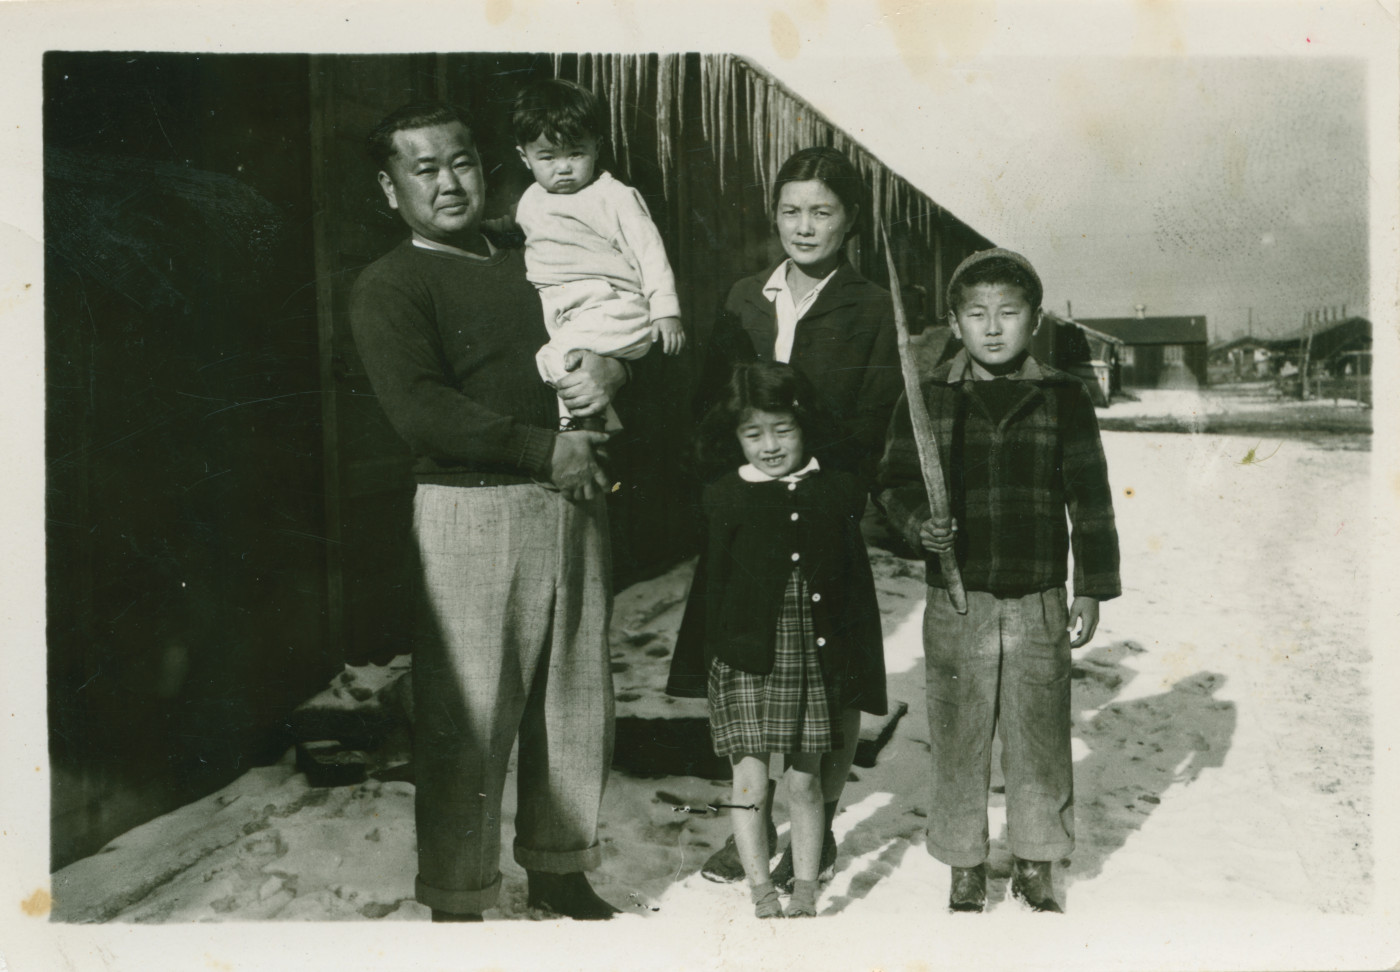 A picture of George Nakano with his parents and siblings posing for a photo at Tule Lake